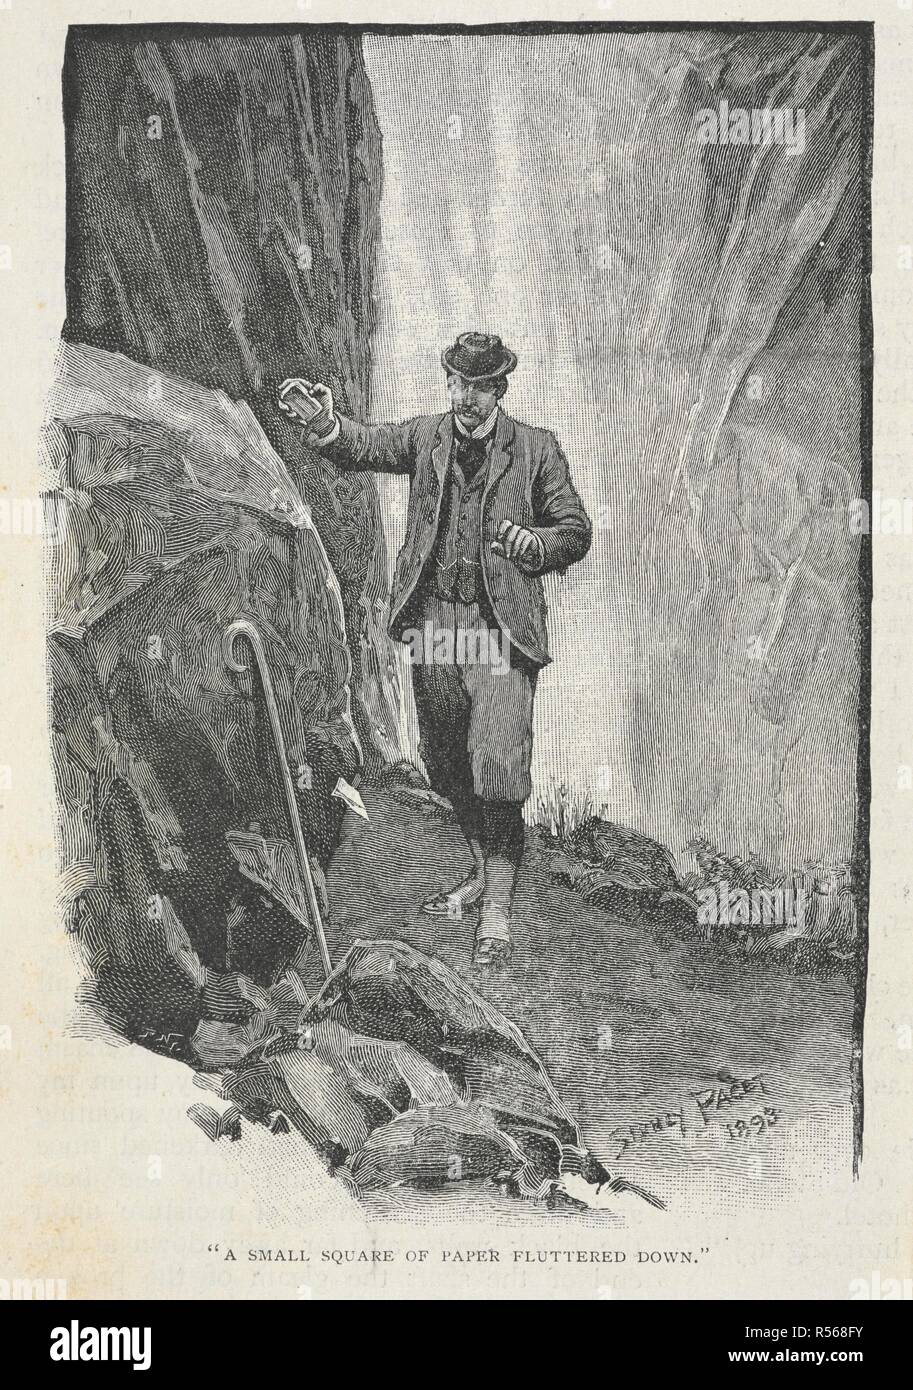 'A small square of paper fluttered down.' Doctor Watson standing at the Reichenbach falls. Illustration for the story 'the adventure of the final problem.'. The Strand magazine : an illustrated monthly / edited by G. Newnes. London : George Newnes. 1893. July to December. Source: P.P.6004.glk page 570. Author: DOYLE, ARTHUR CONAN. Paget, Sydney. Stock Photo